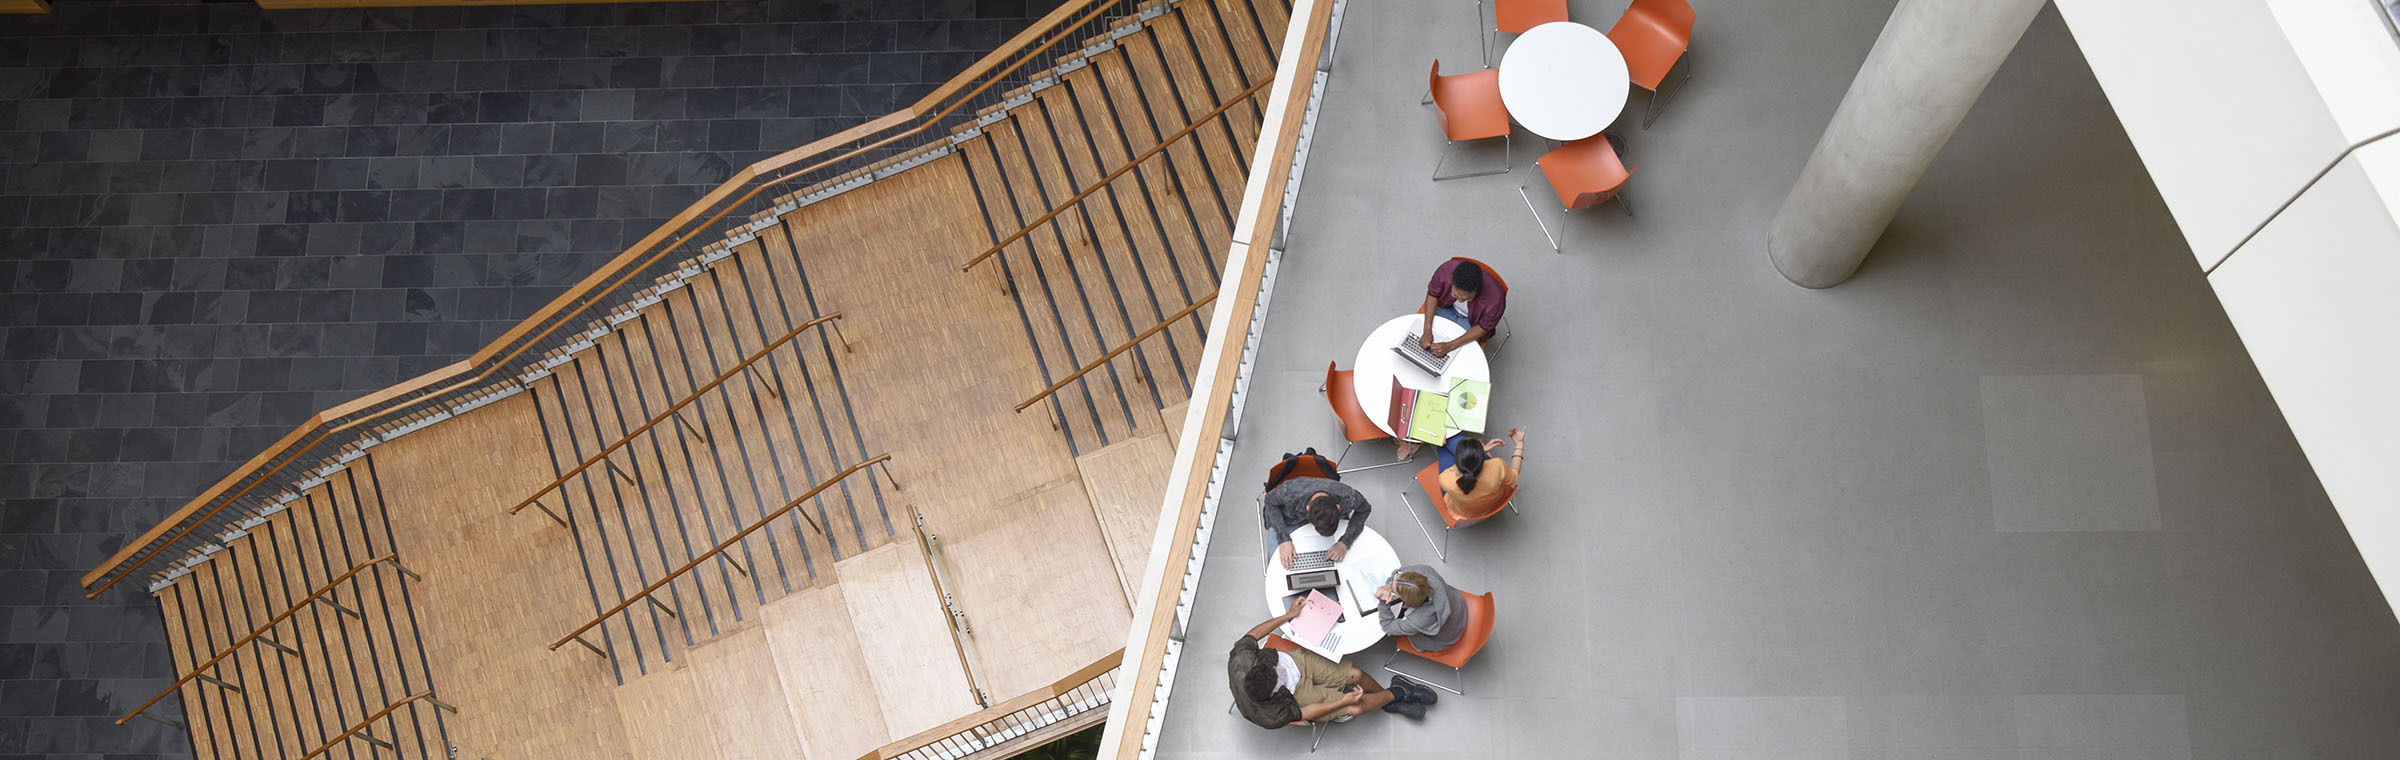 aerial view of students in a university library